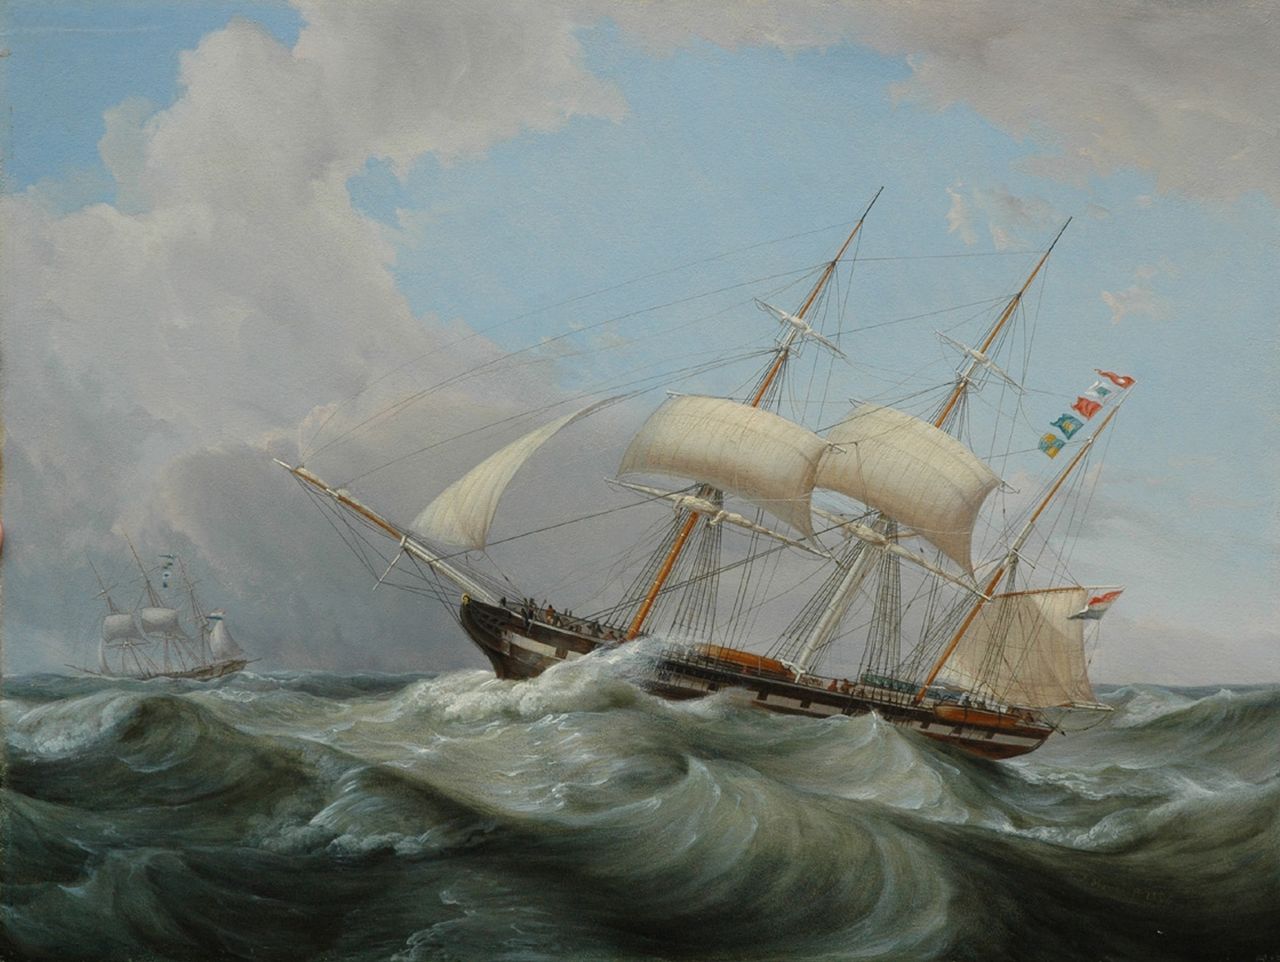 Morel C.J.  | Casparus Johannes Morel, Sailing barge in choppy seas, oil on panel 37.6 x 49.9 cm, signed l.r. and dated 1856